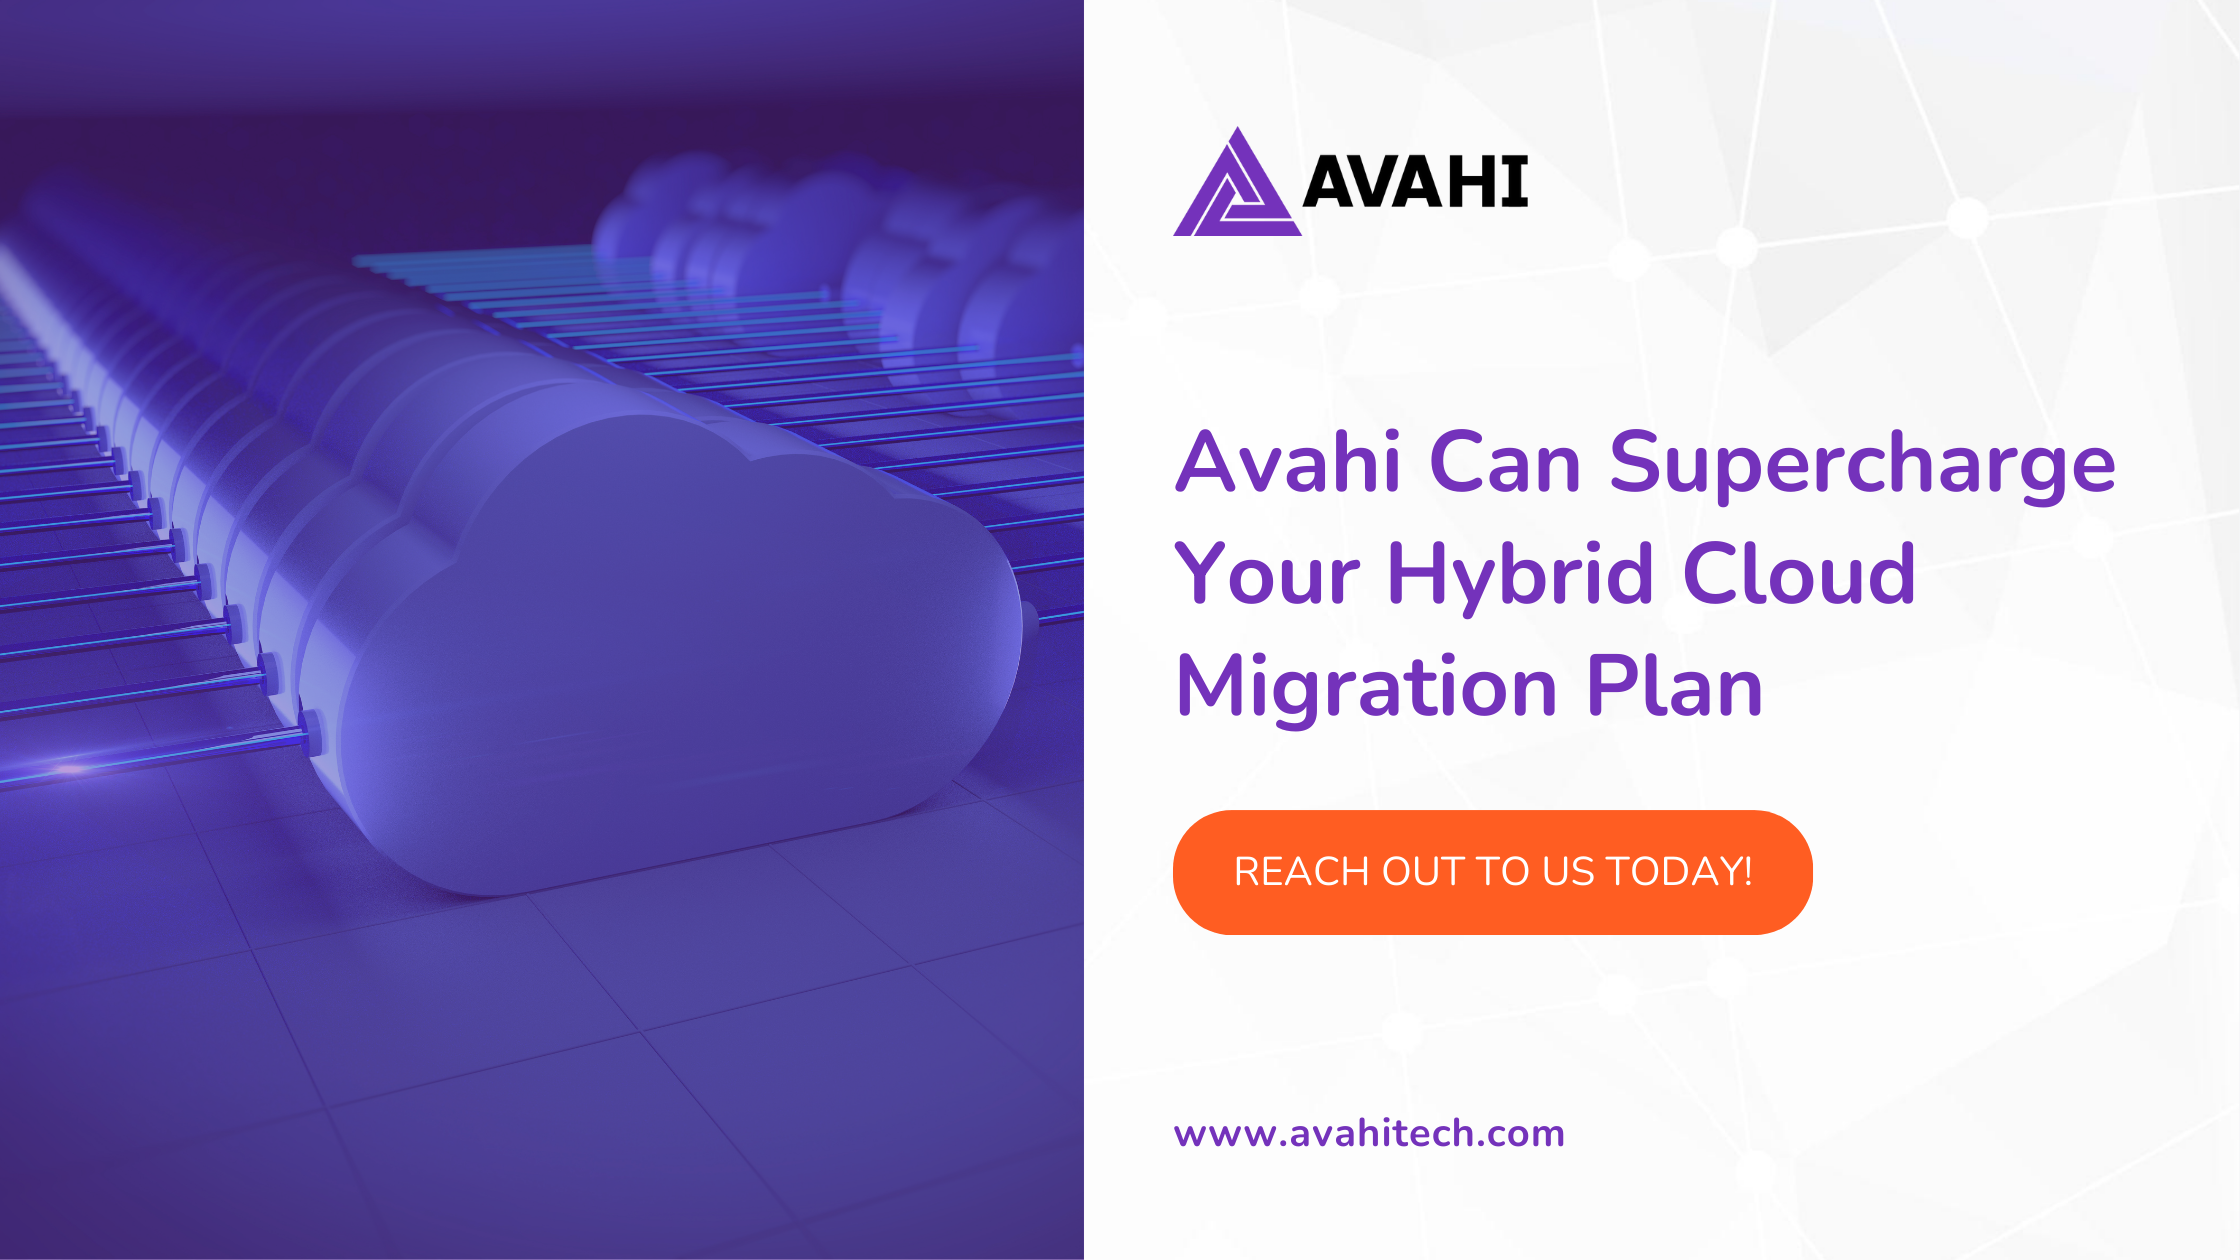 Avahi Can Supercharge Your Hybrid Cloud Migration Plan